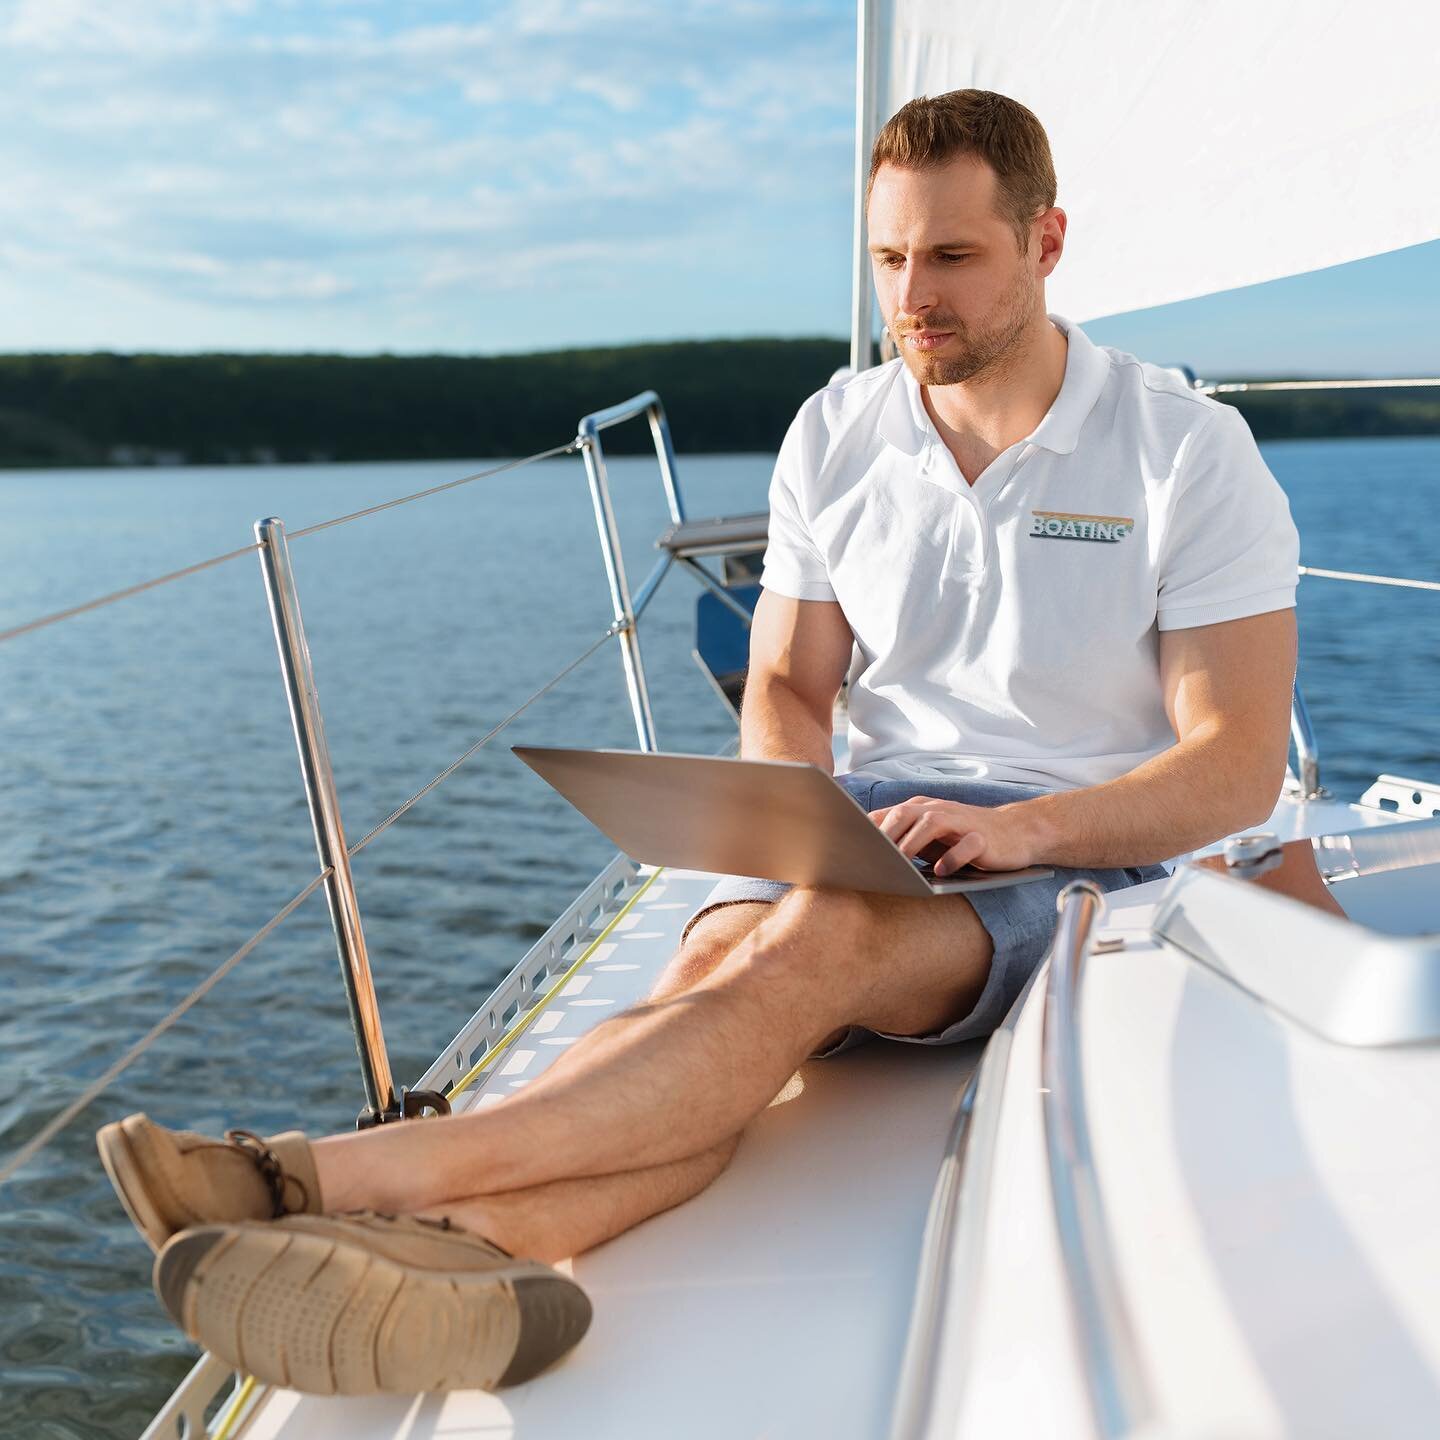 Work from&hellip;boat? However your schedule looks this week, make sure you&rsquo;re decked out in style! 🌊🎣🐟 

#boating #lakeminnetonka #minnesota #lakelife #lifeisbetteratthelake #lakelifeshop